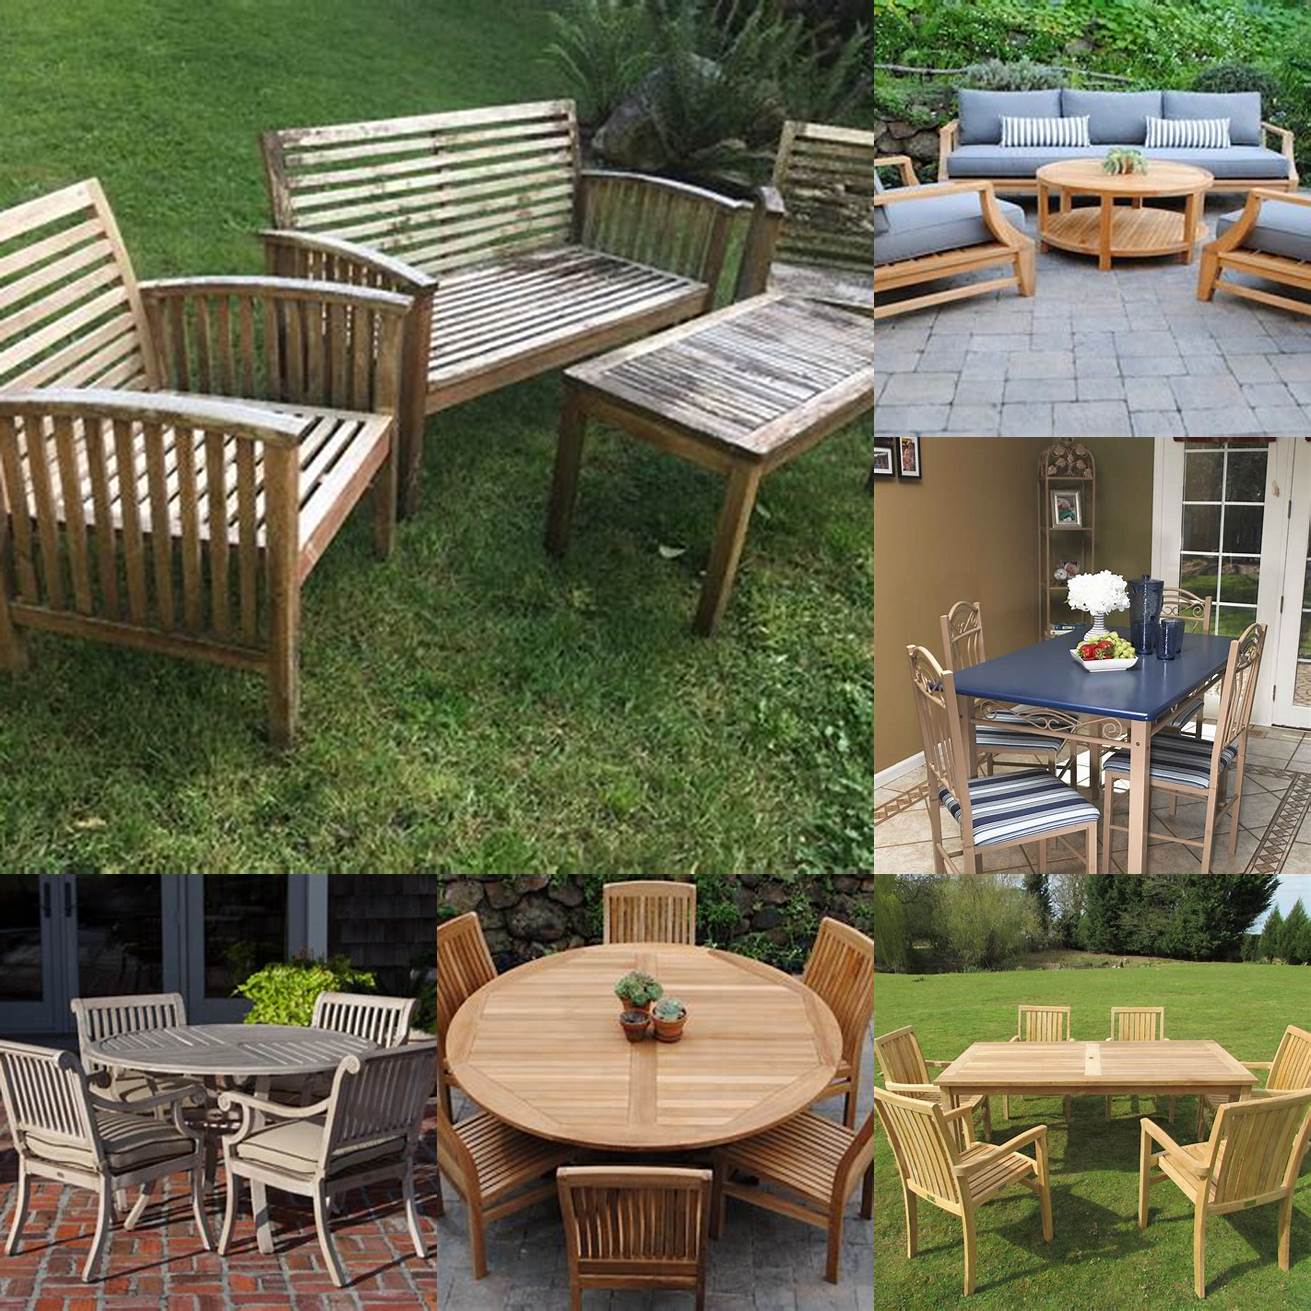 Teak Furniture in Dry and Well-Ventilated Area